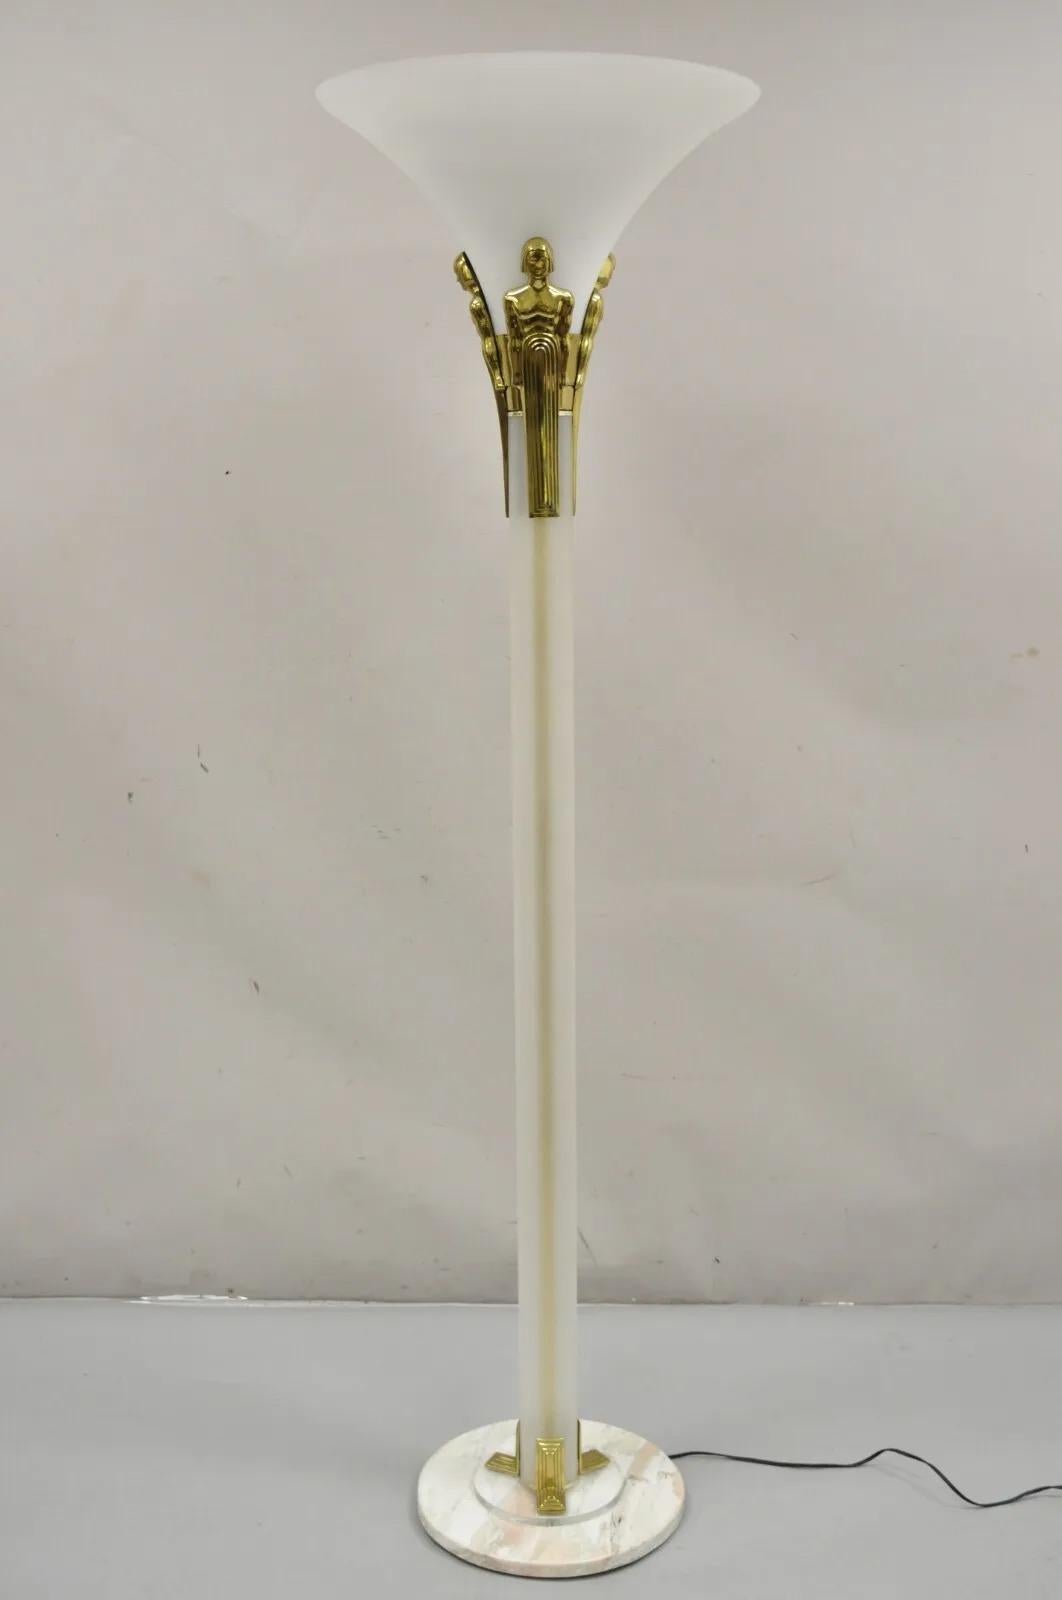 Vintage Art Deco Style Figural Frosted Acrylic and Glass Torchiere Floor Lamp For Sale 8